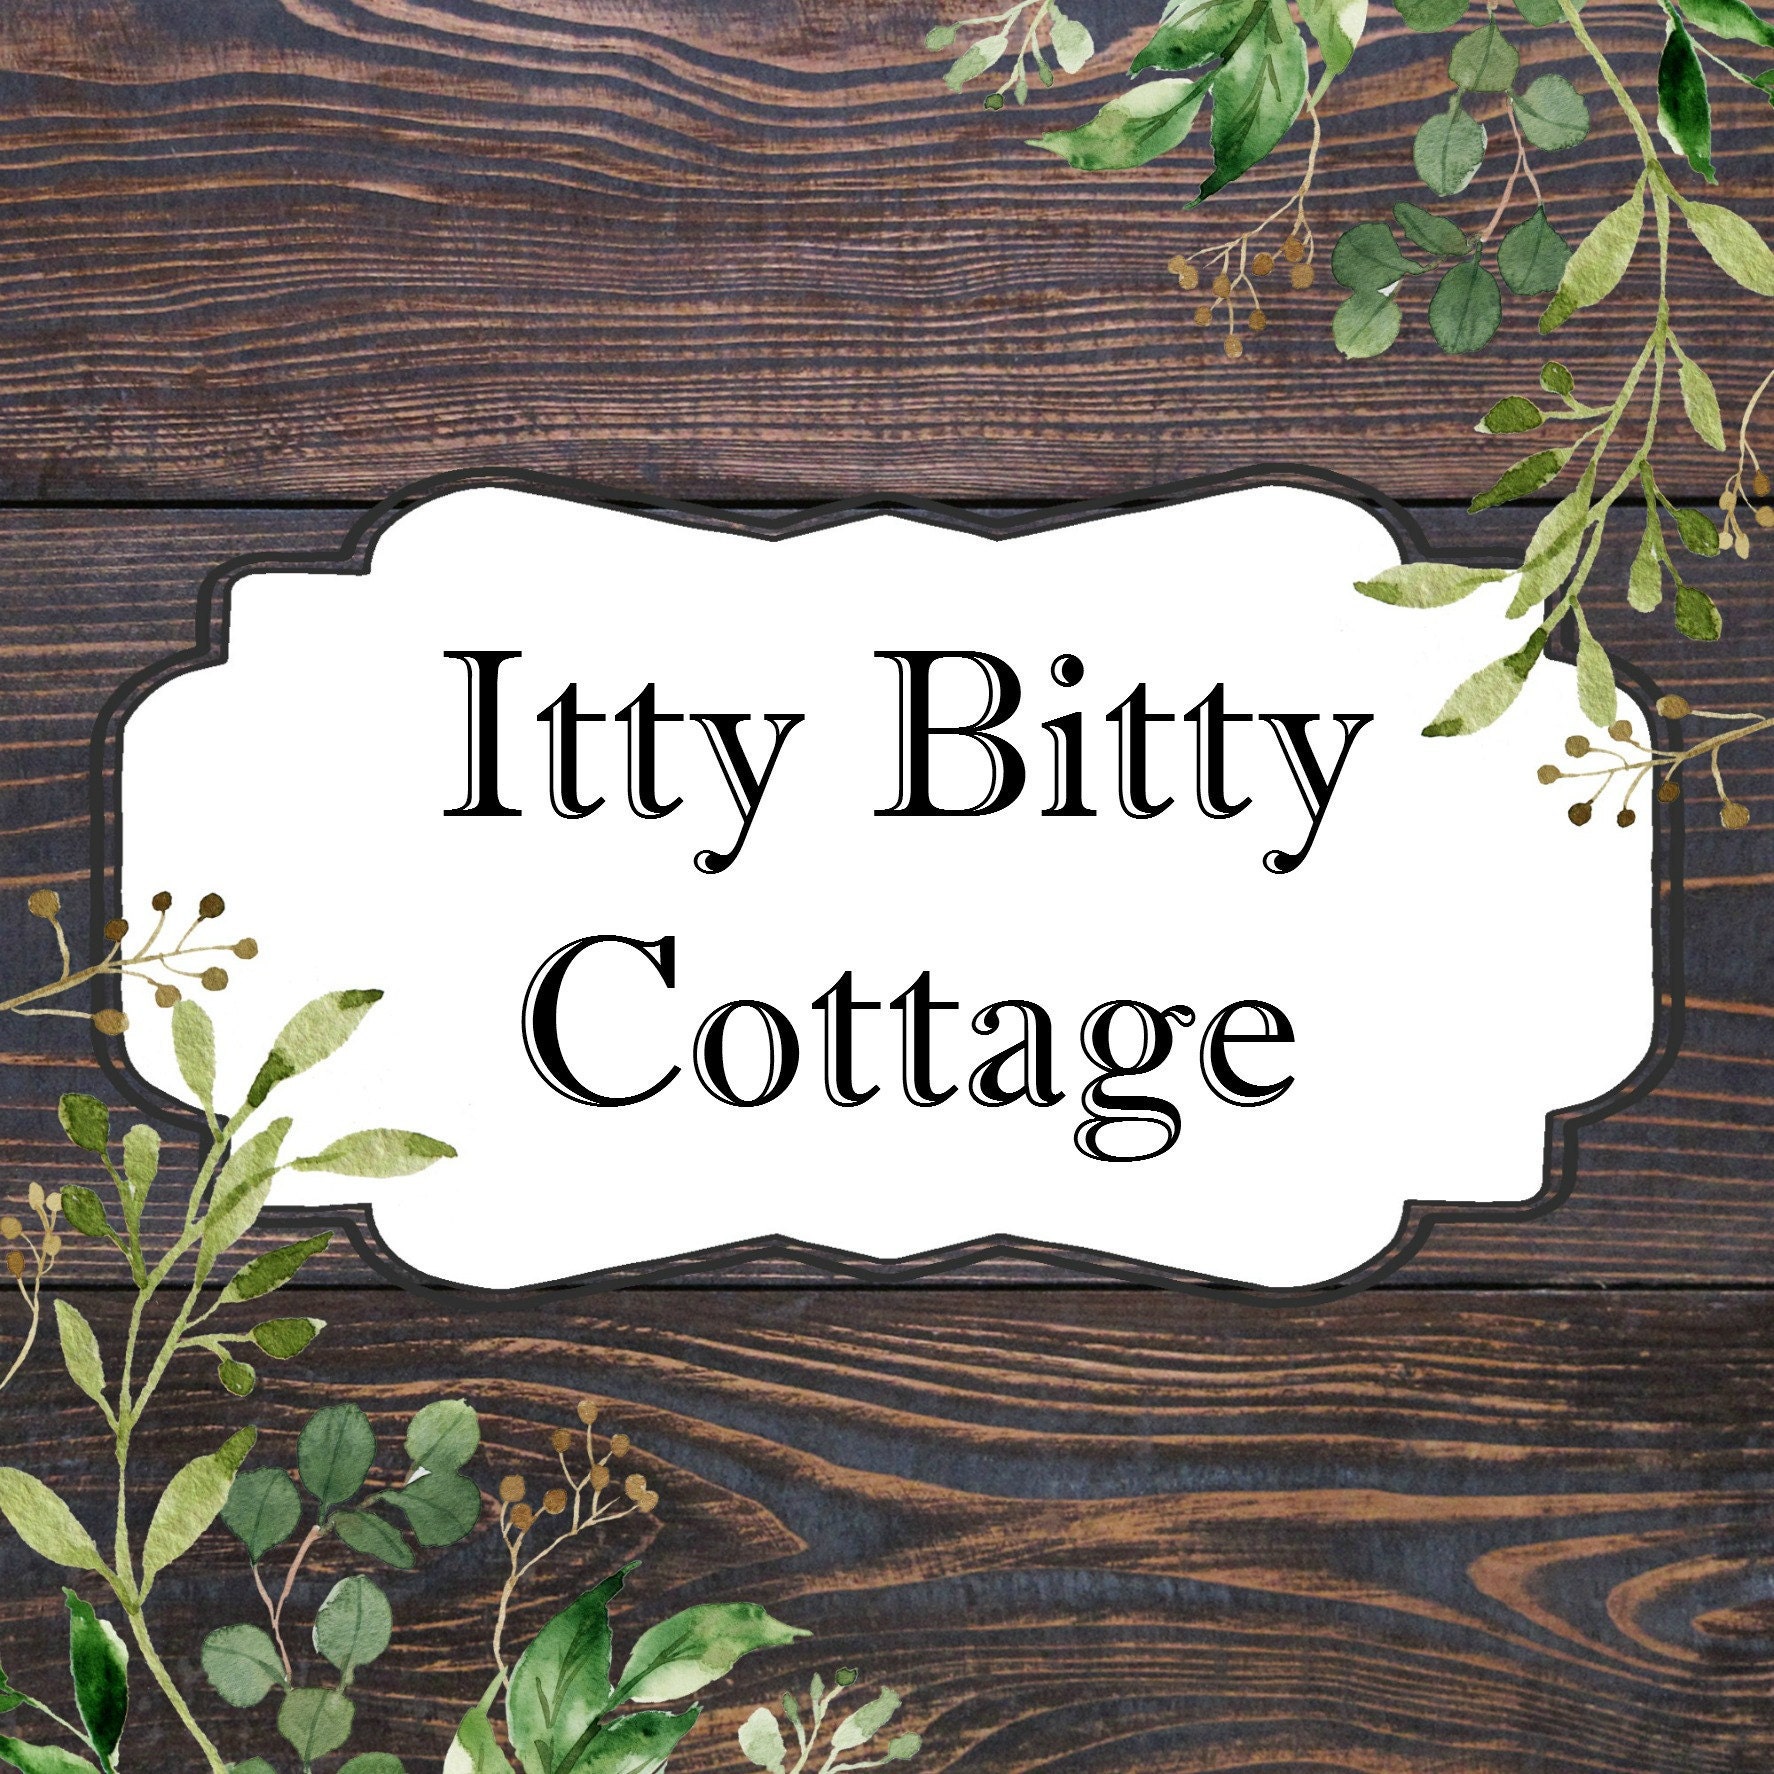 Itty Bitty Cottage By Ittybittycottage On Etsy